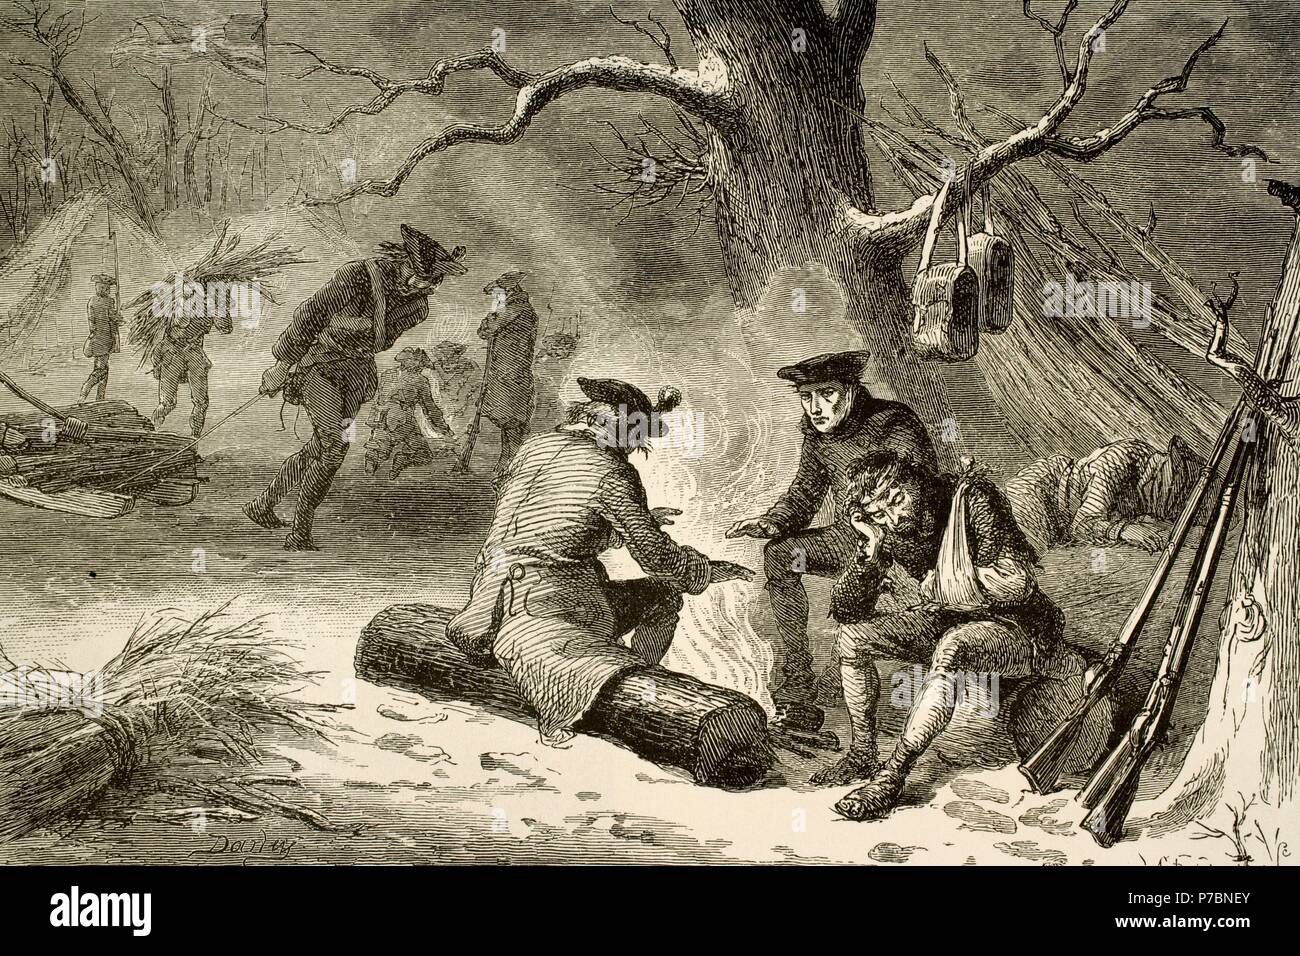 American Revolutionary War (1775-1783). Valley Forge. Pennsylvania. Continental Army's camp in winter, 1777-1778. Engraving by A. Bobbet. 'American Revolution'. 19th century. Stock Photo